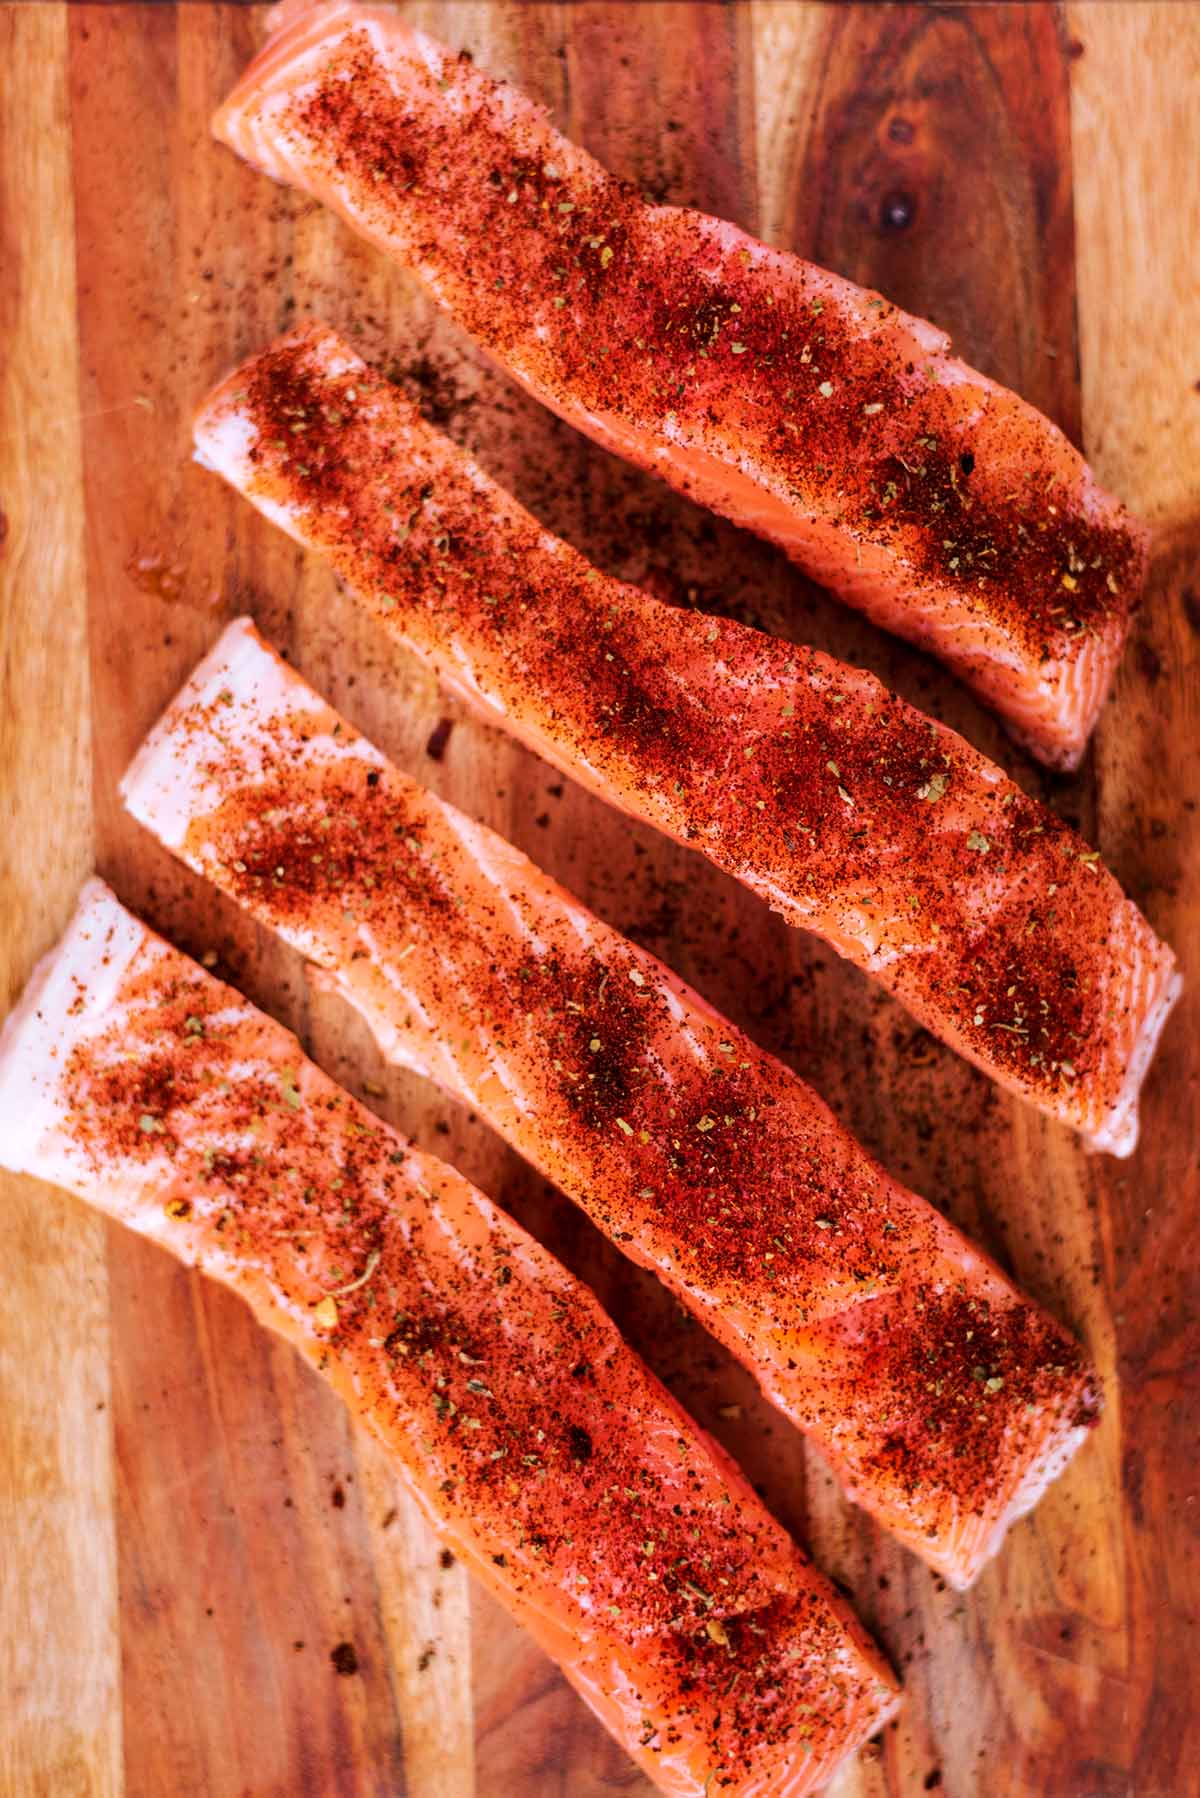 Four salmon fillets on a wooden board coated in taco seasoning.